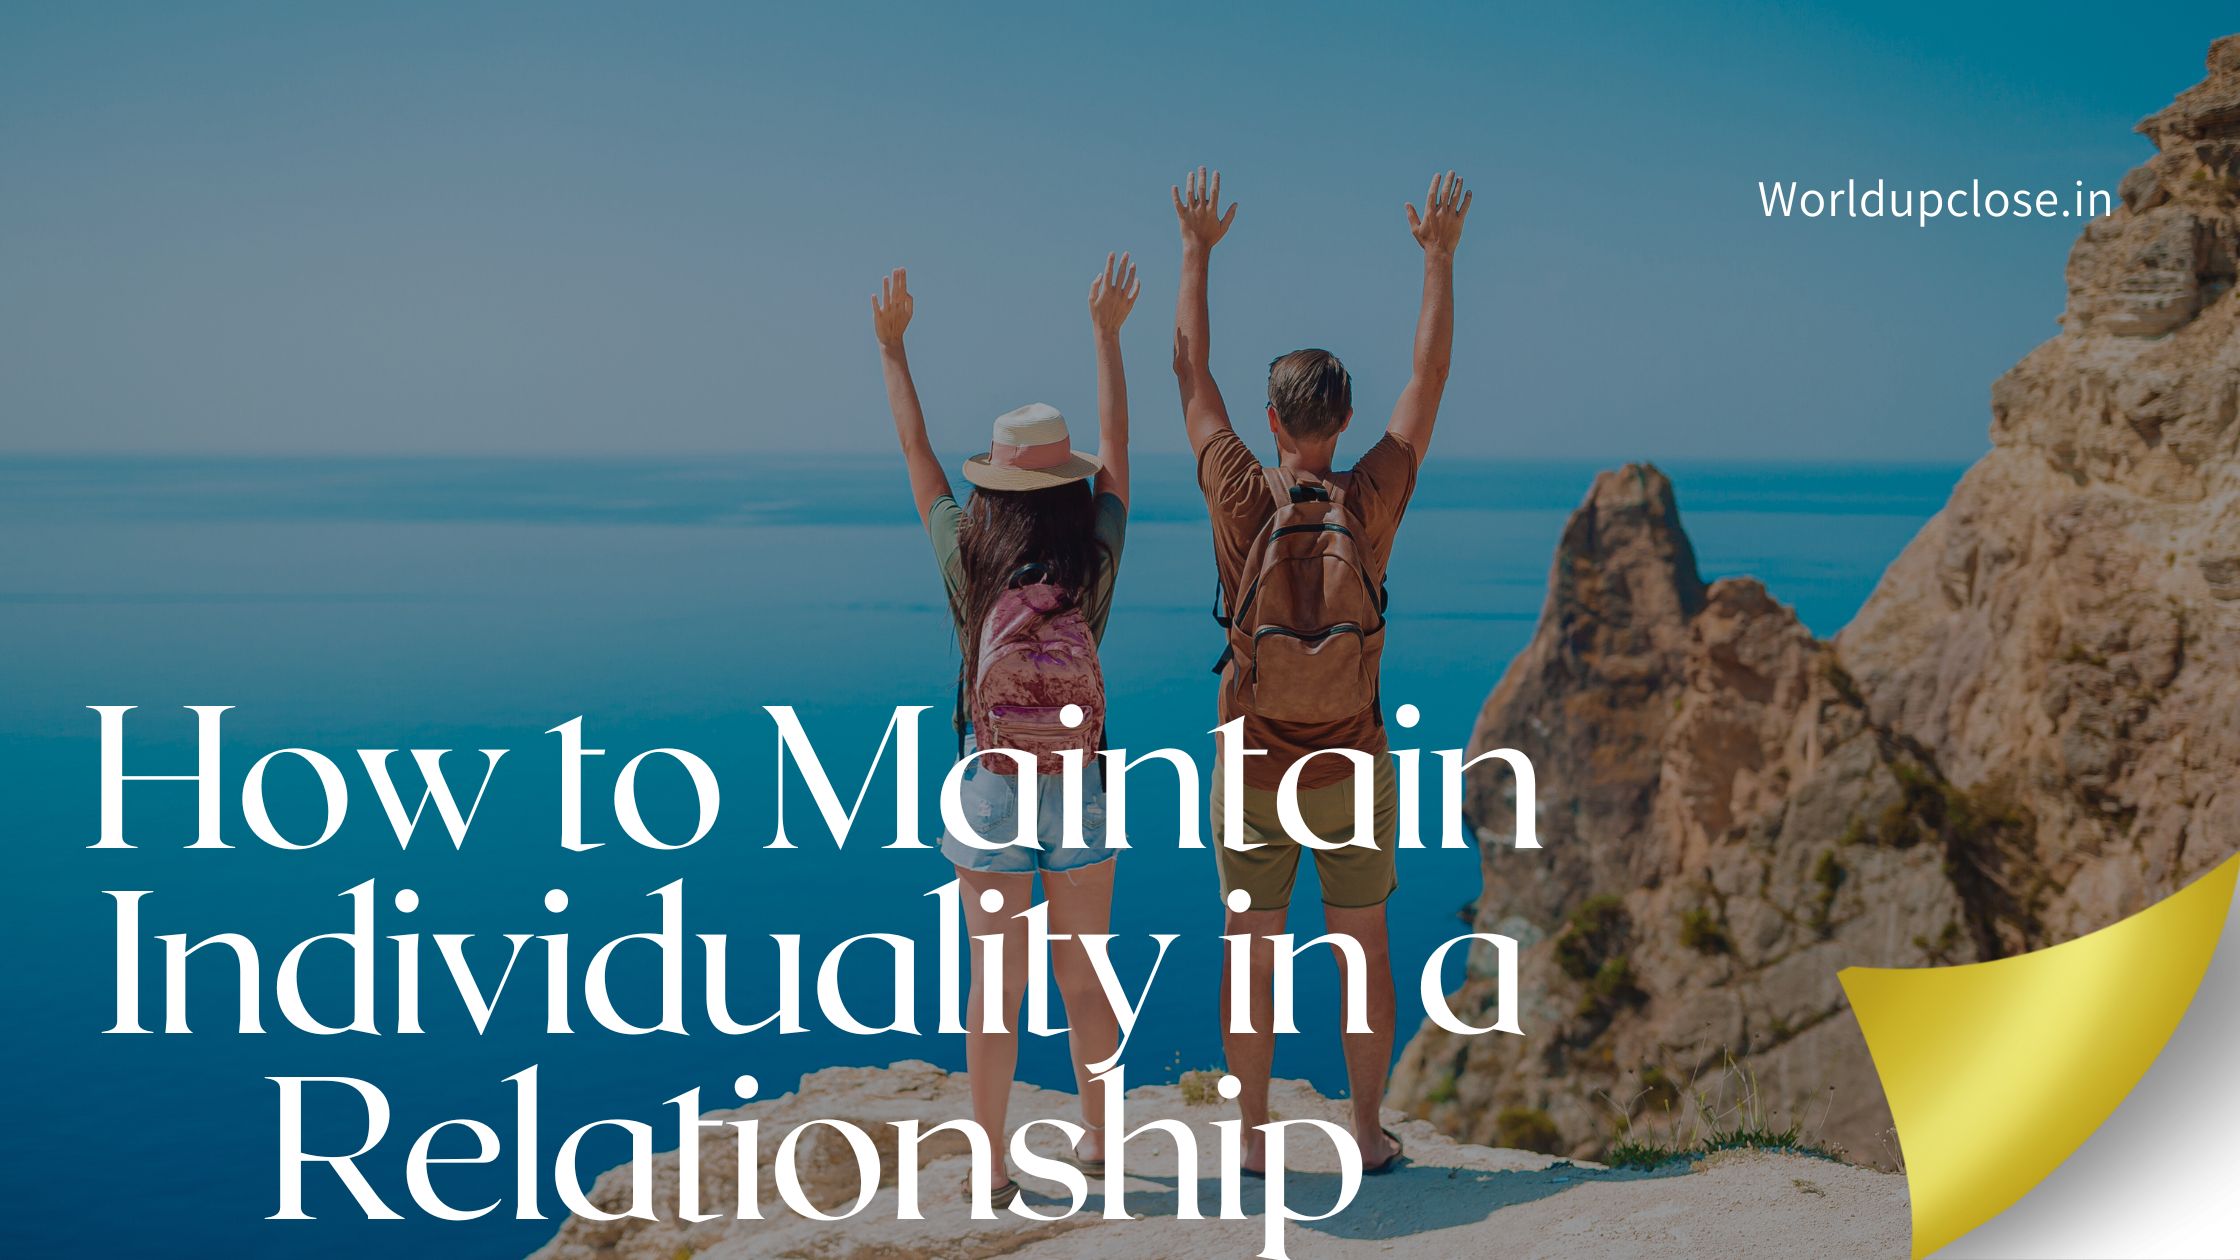 How to Maintain Individuality in a Relationship - 12 Successful Ways 2